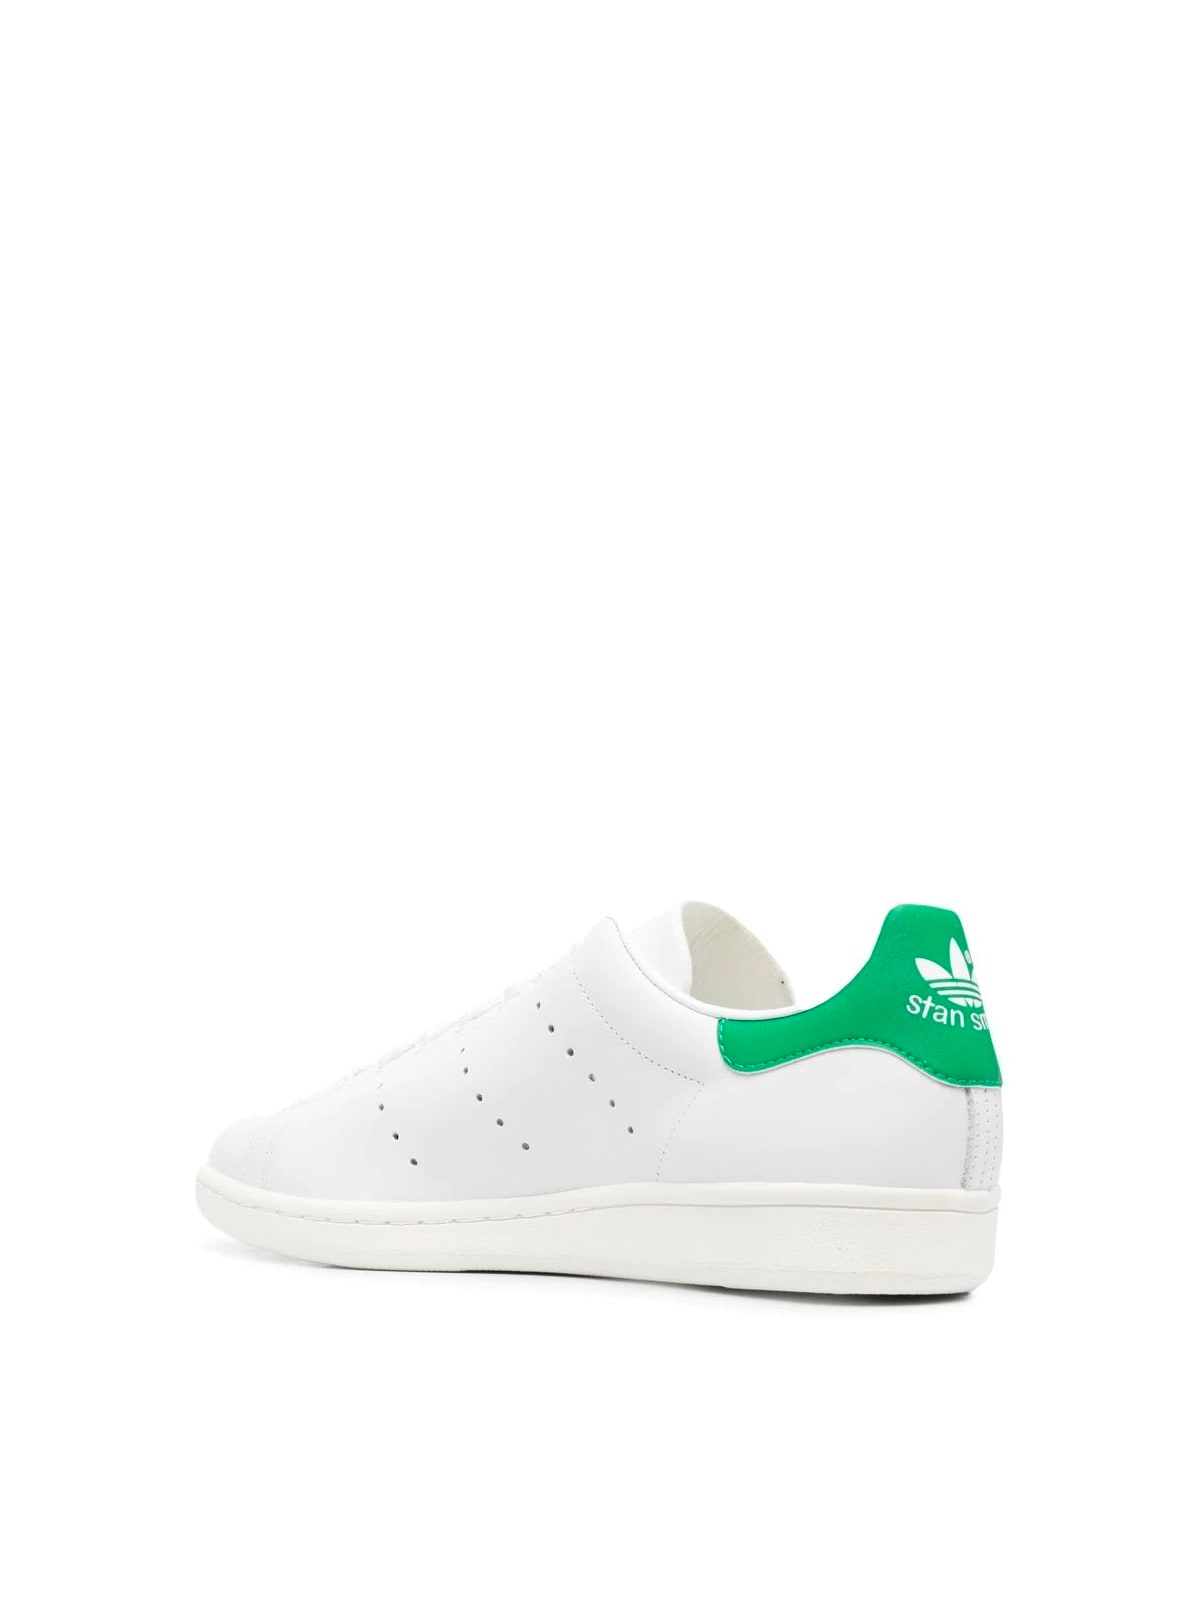 Shop Adidas Originals Stan Smith 80s Sneakers In Ftwwht Ftwwht Green